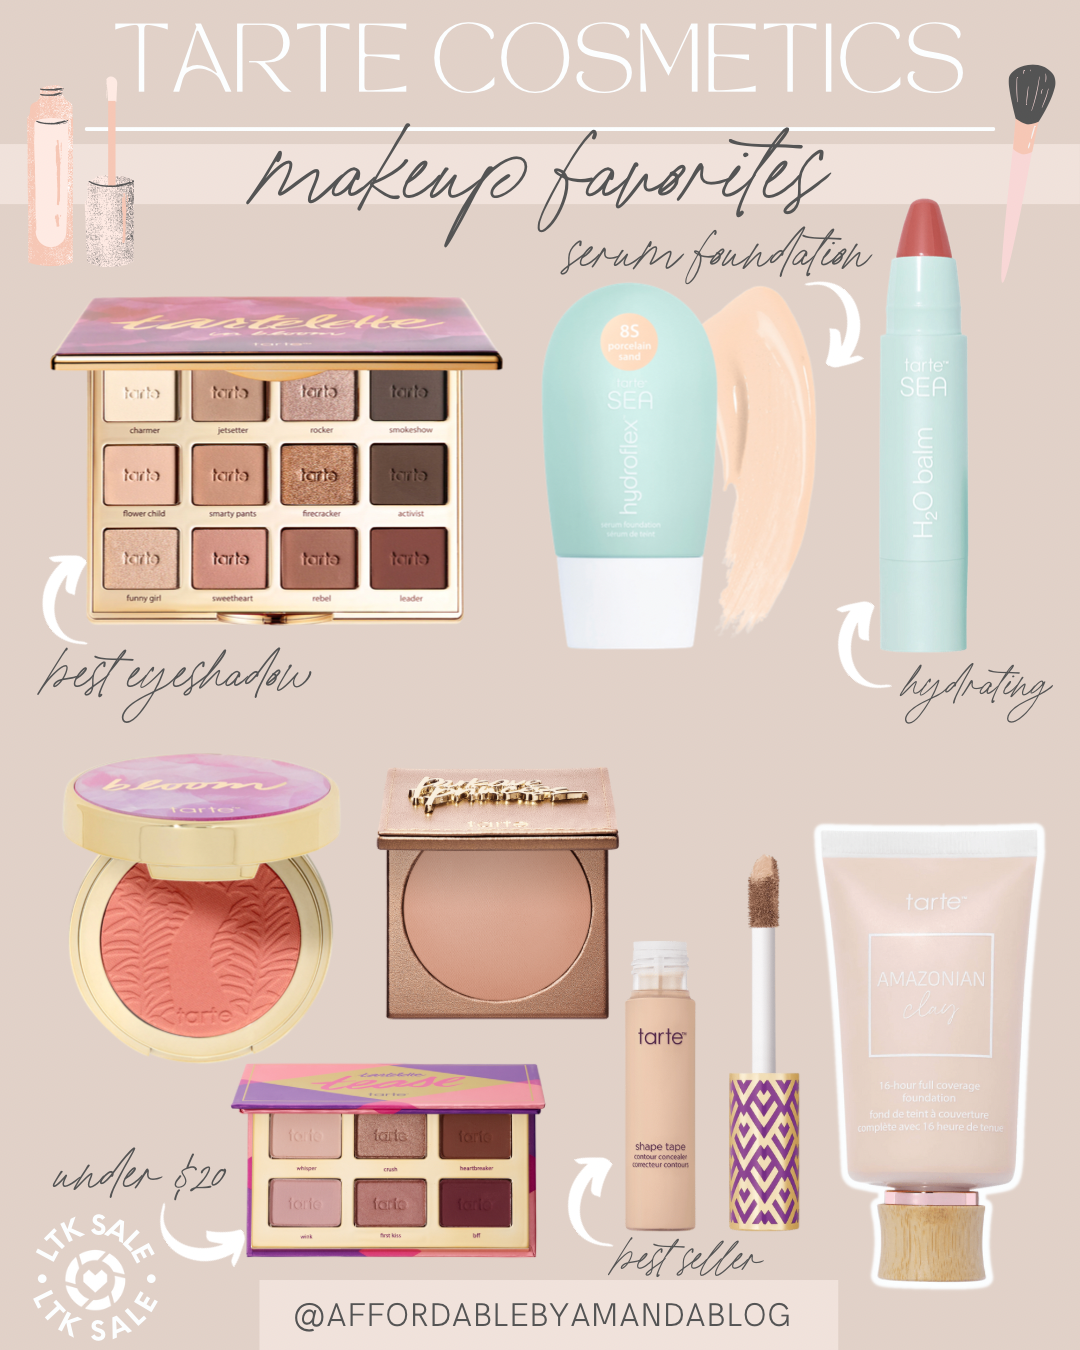 A Guide to My Favorite Products from Tarte Cosmetics - Affordable by Amanda